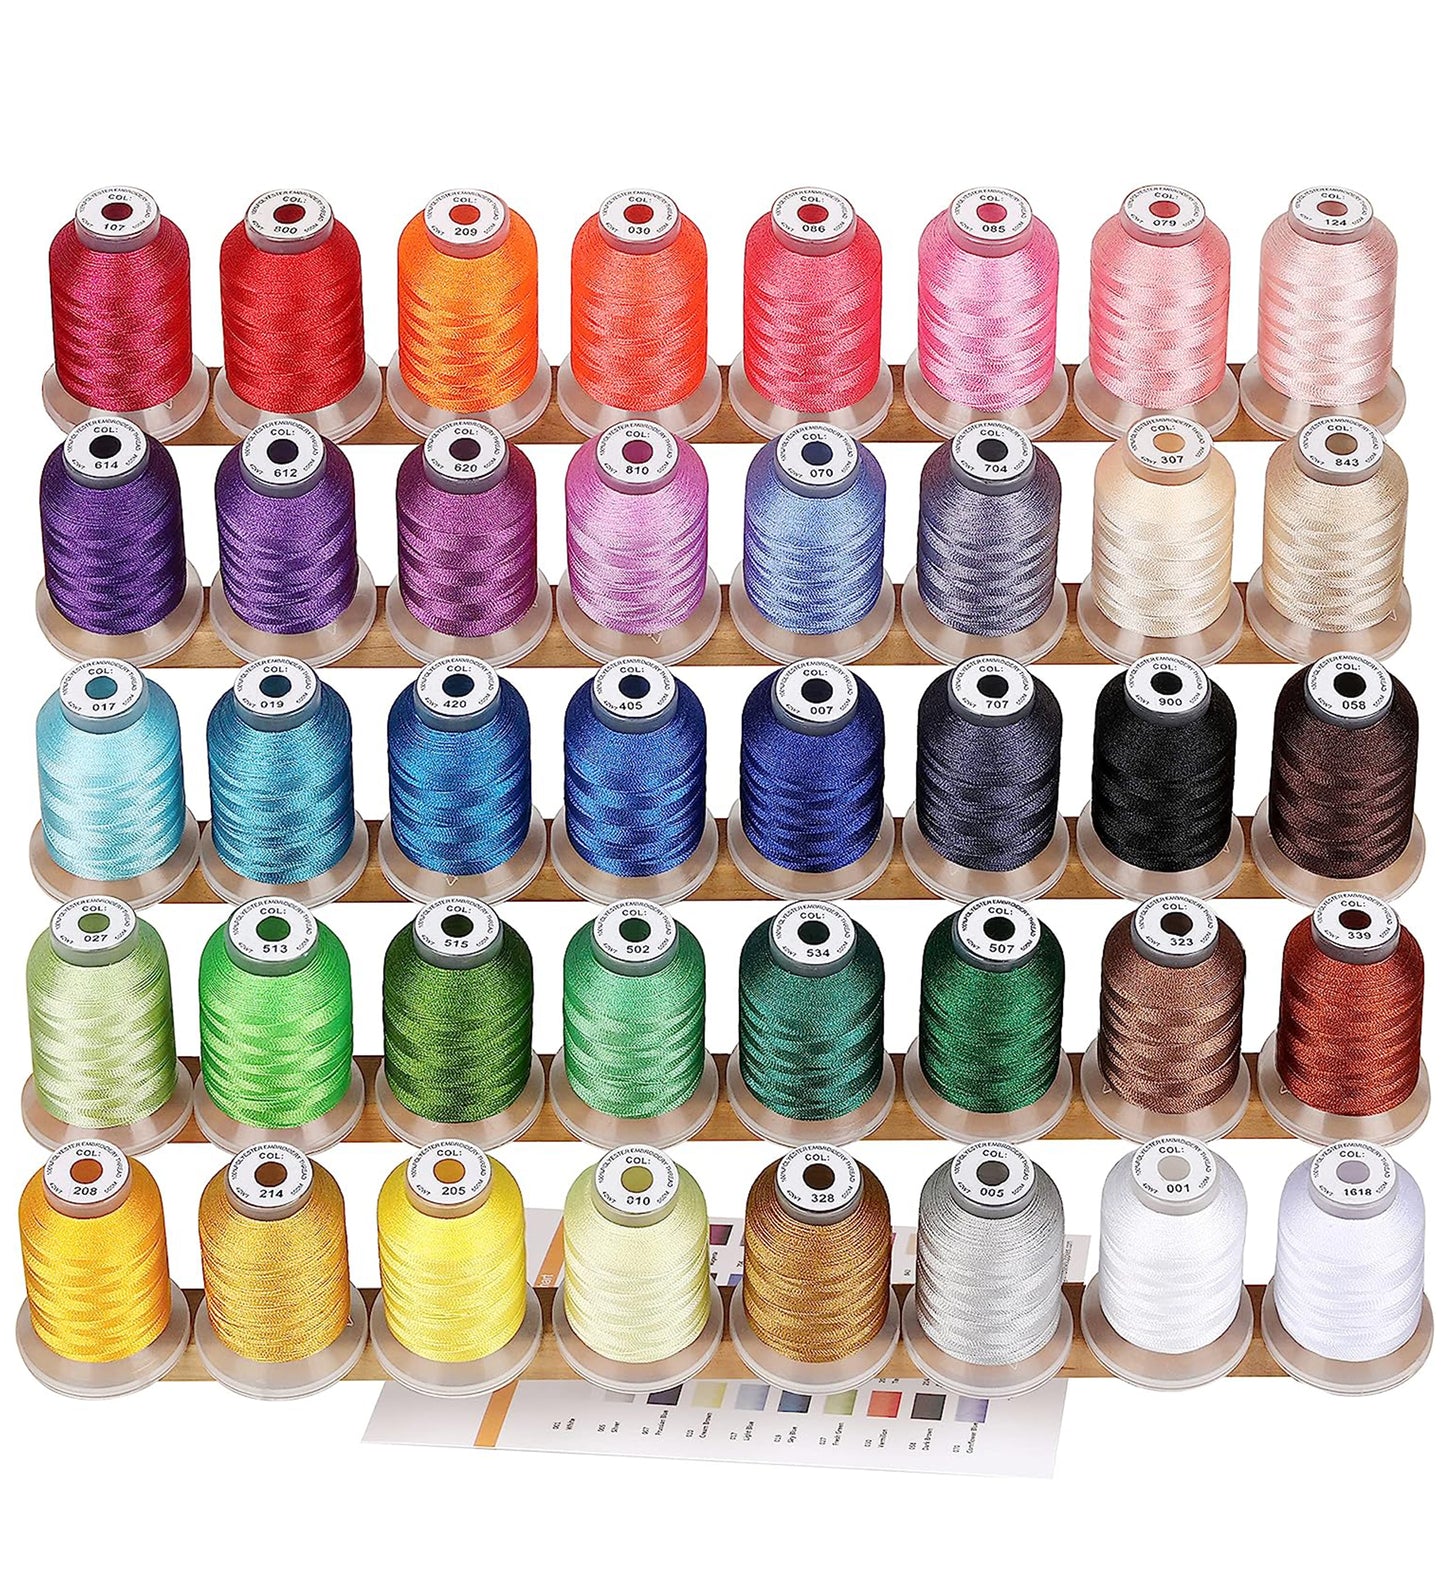 New brothread 40 Brother Colors Polyester Embroidery Machine Thread Kit 500M (550Y)